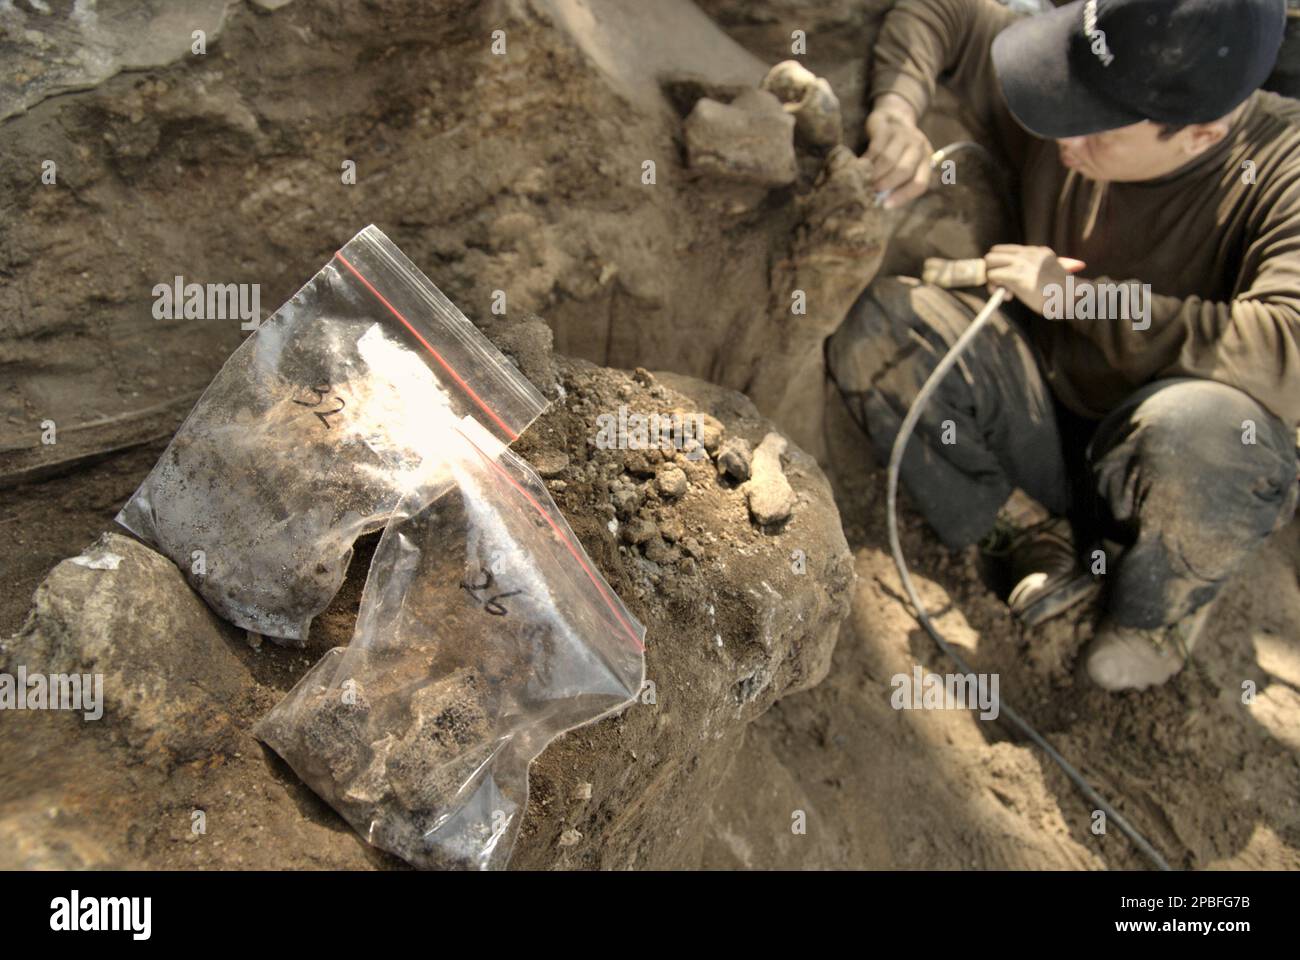 Pieces of bone are placed in plastic bags and marked during the excavation of fossilized bones of an extinct elephant species scientifically identified as Elephas hysudrindicus, or popularly called 'Blora elephant', in Sunggun, Mendalem, Kradenan, Blora, Central Java, Indonesia. The team of scientists from Vertebrate Research (Geological Agency, Indonesian Ministry of Energy and Mineral Resources) led by paleontologists Iwan Kurniawan and Fachroel Aziz discovered the species' bones almost entirely (around 90 percent complete) that later would allow them to build a scientific reconstruction,... Stock Photo